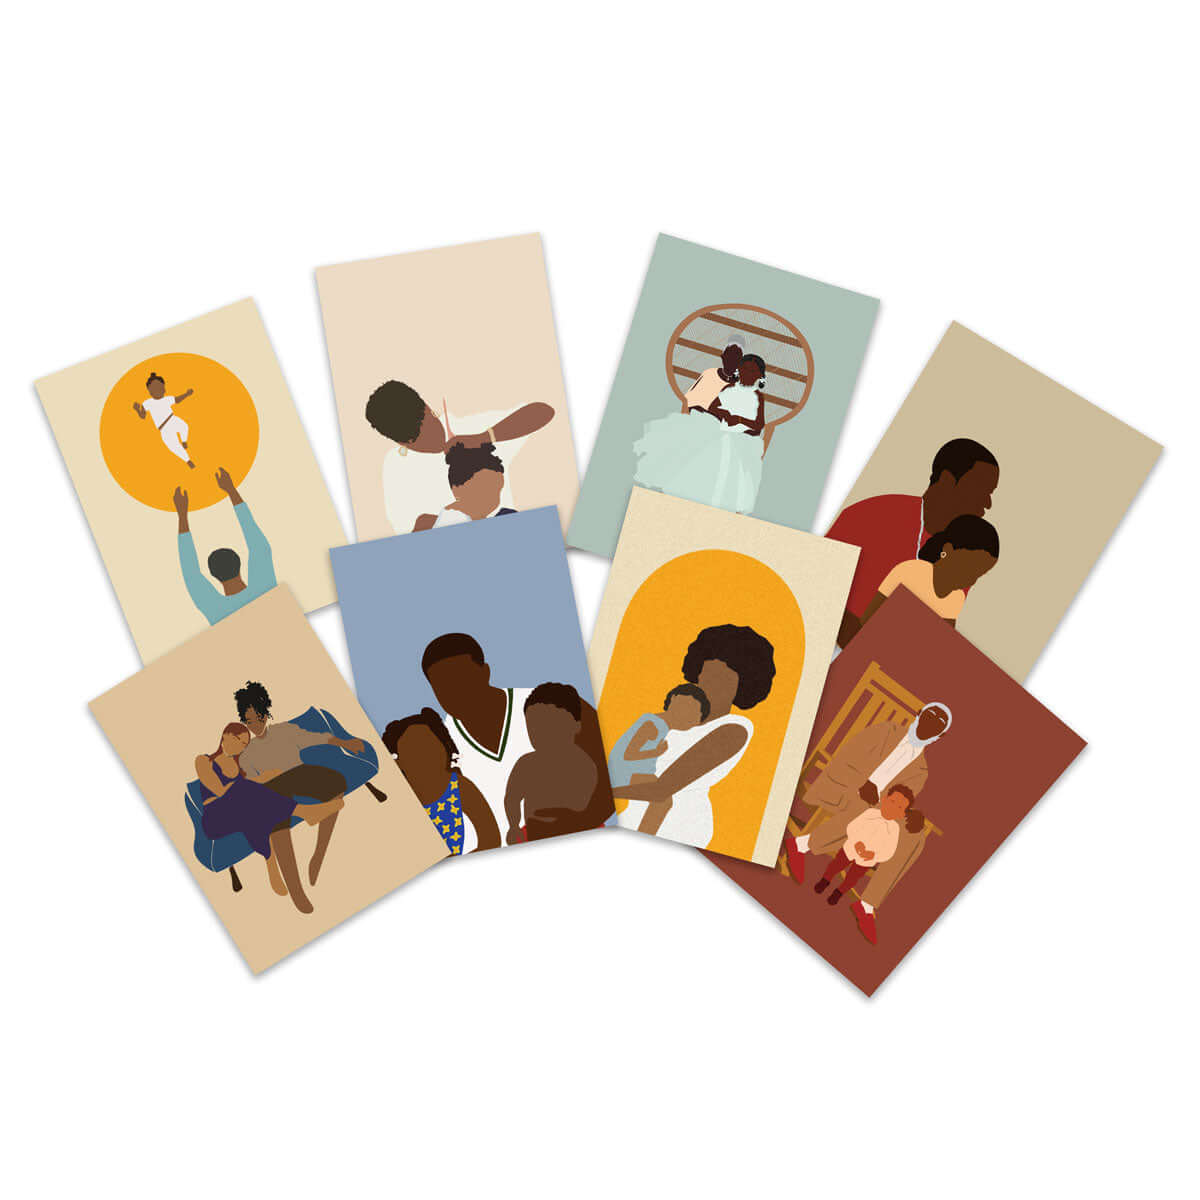 all 8 cards in the kinfolk collection bundle that show illustration of everyday family life